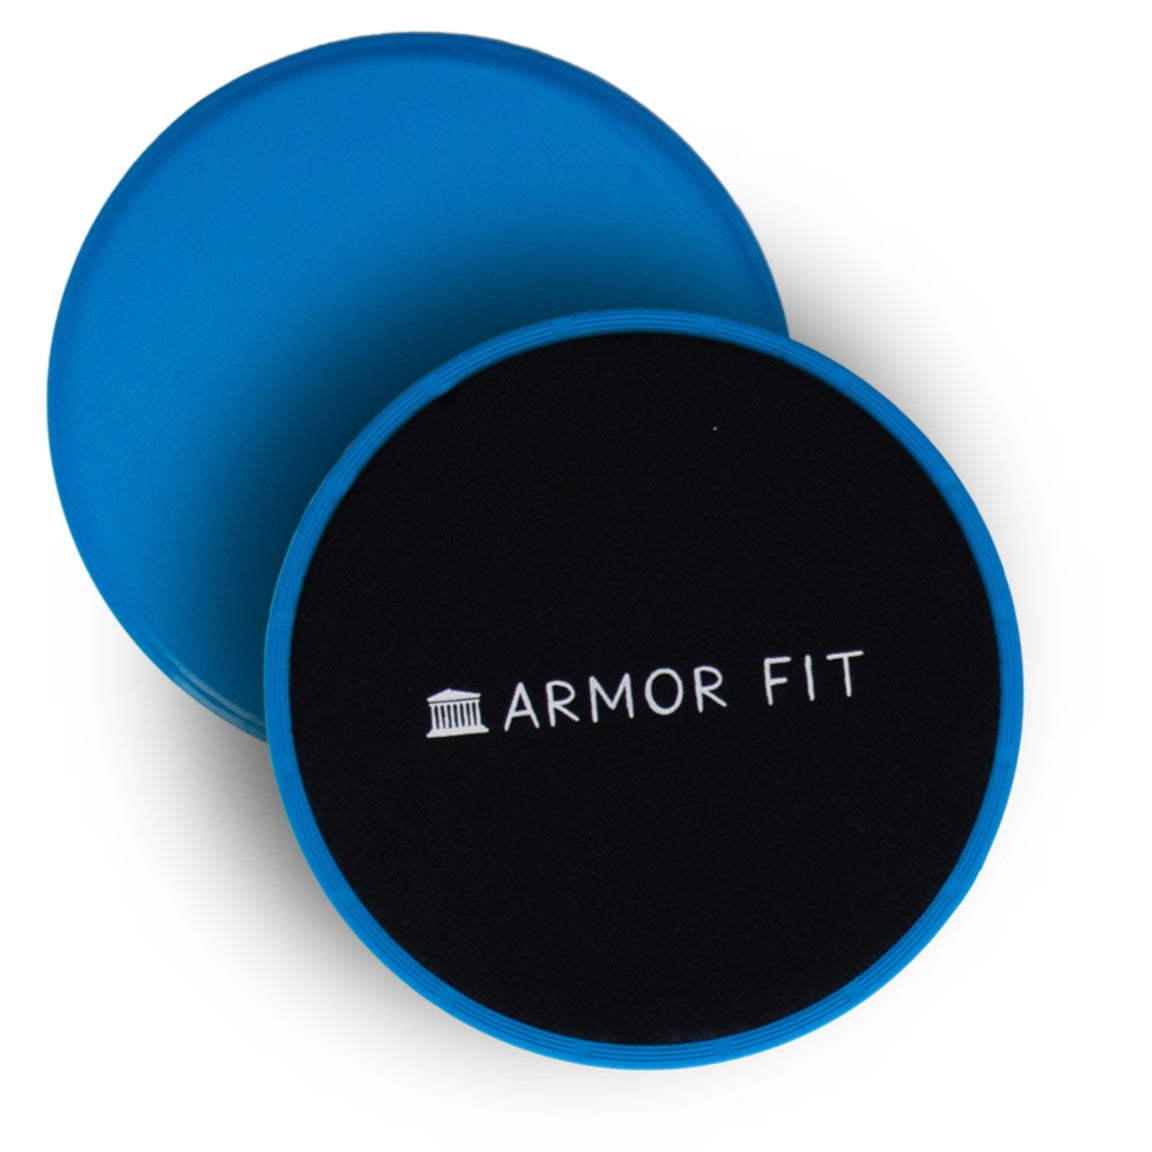 Dual Sided Sliding Discs - Armor Fit